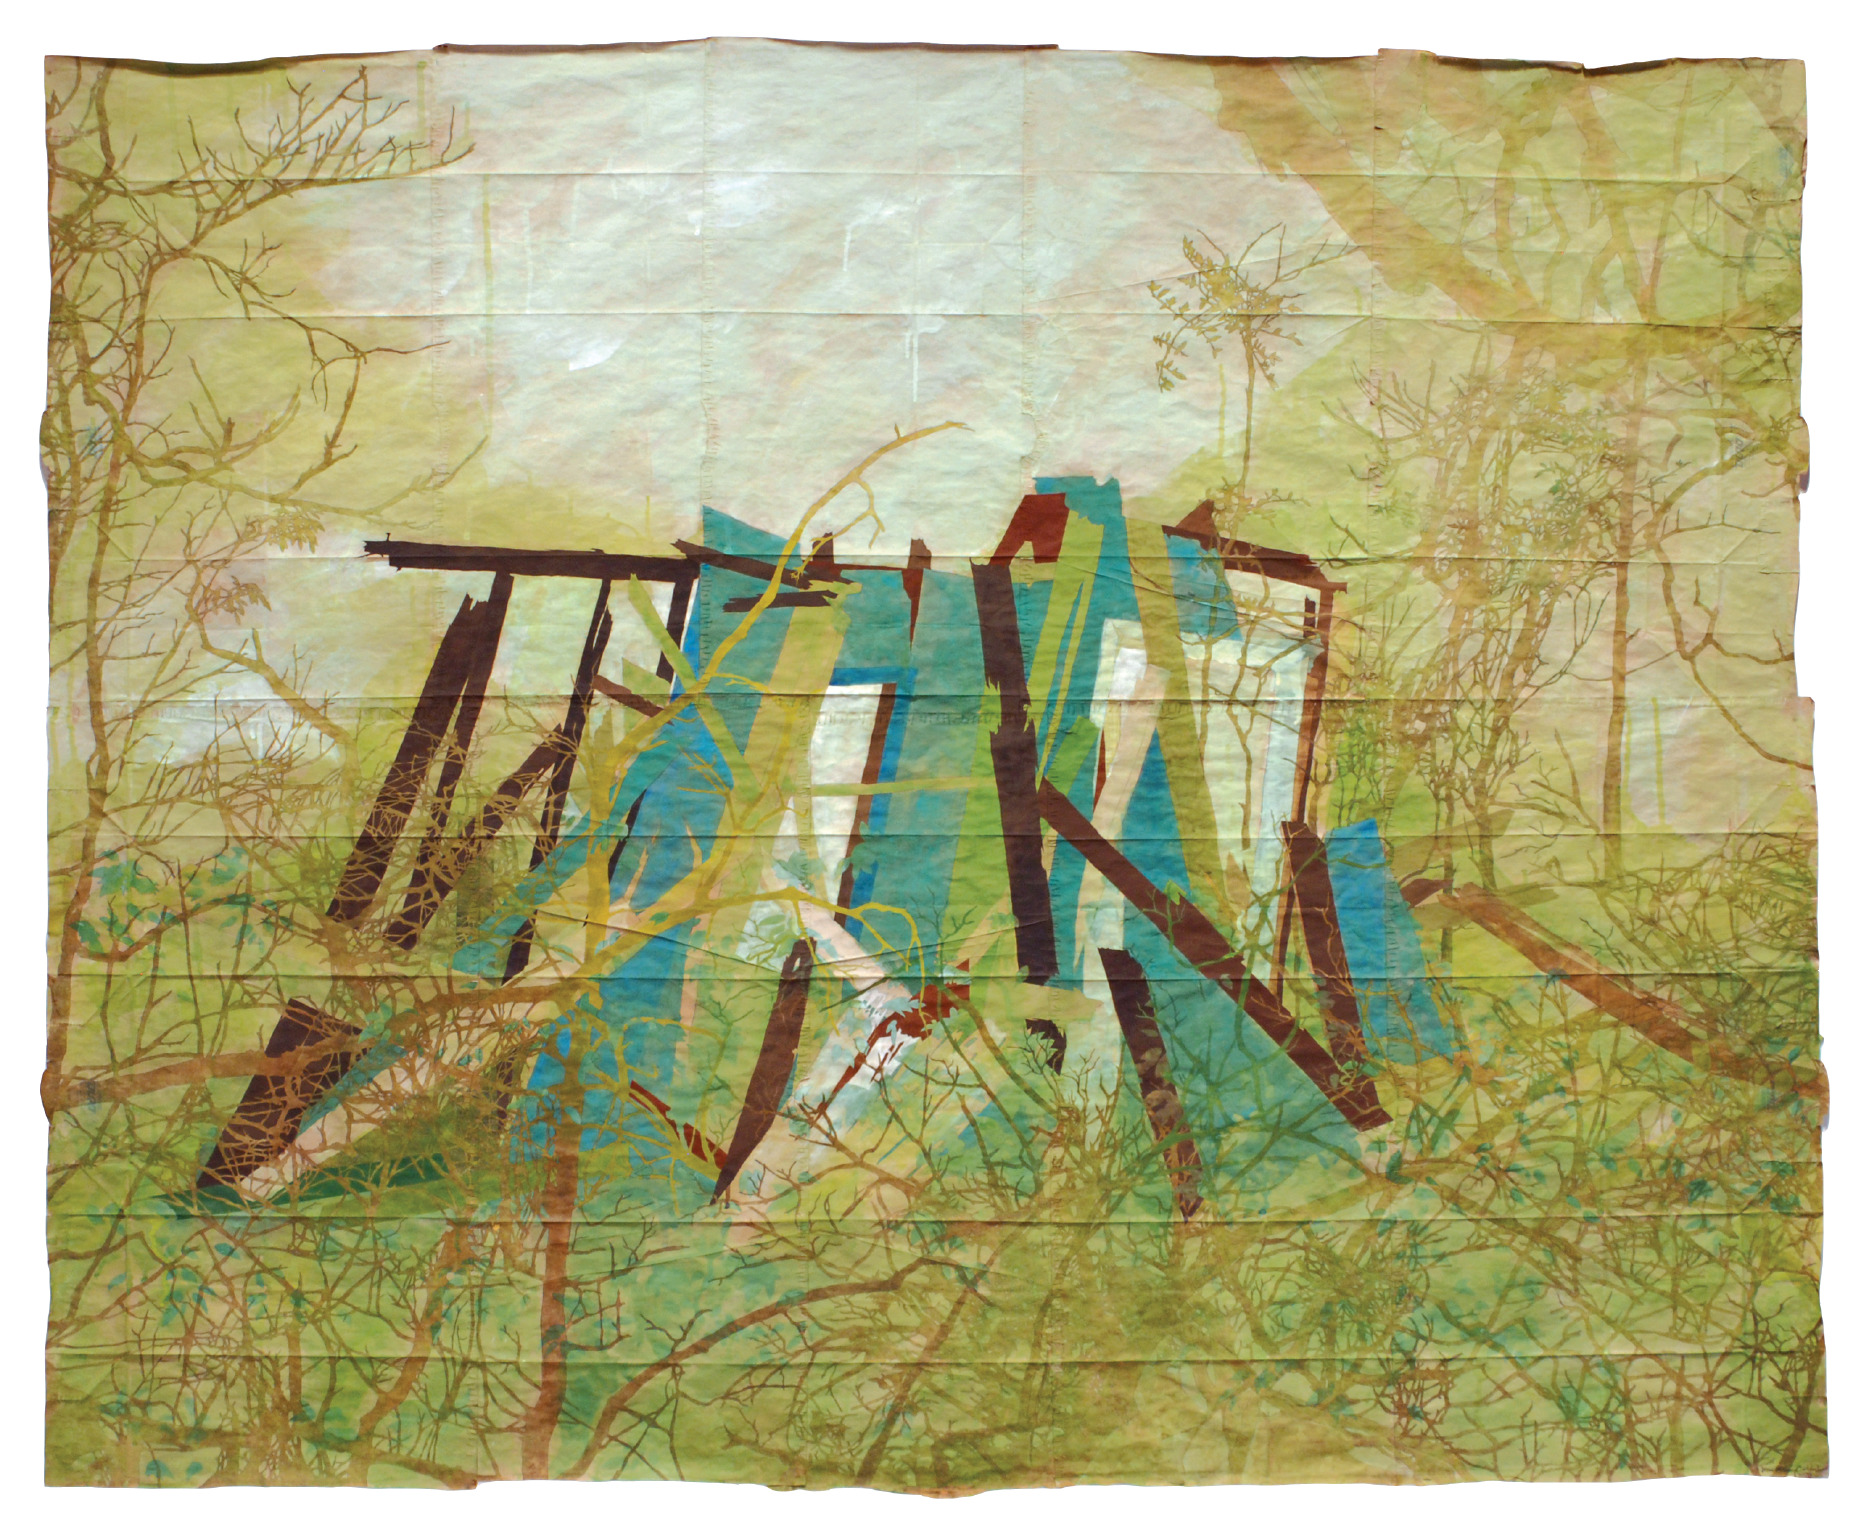 "somewhere south of Violet" by Maysey Craddock, a gouache work on paper showing a dilapidated wooden structure in a forest.